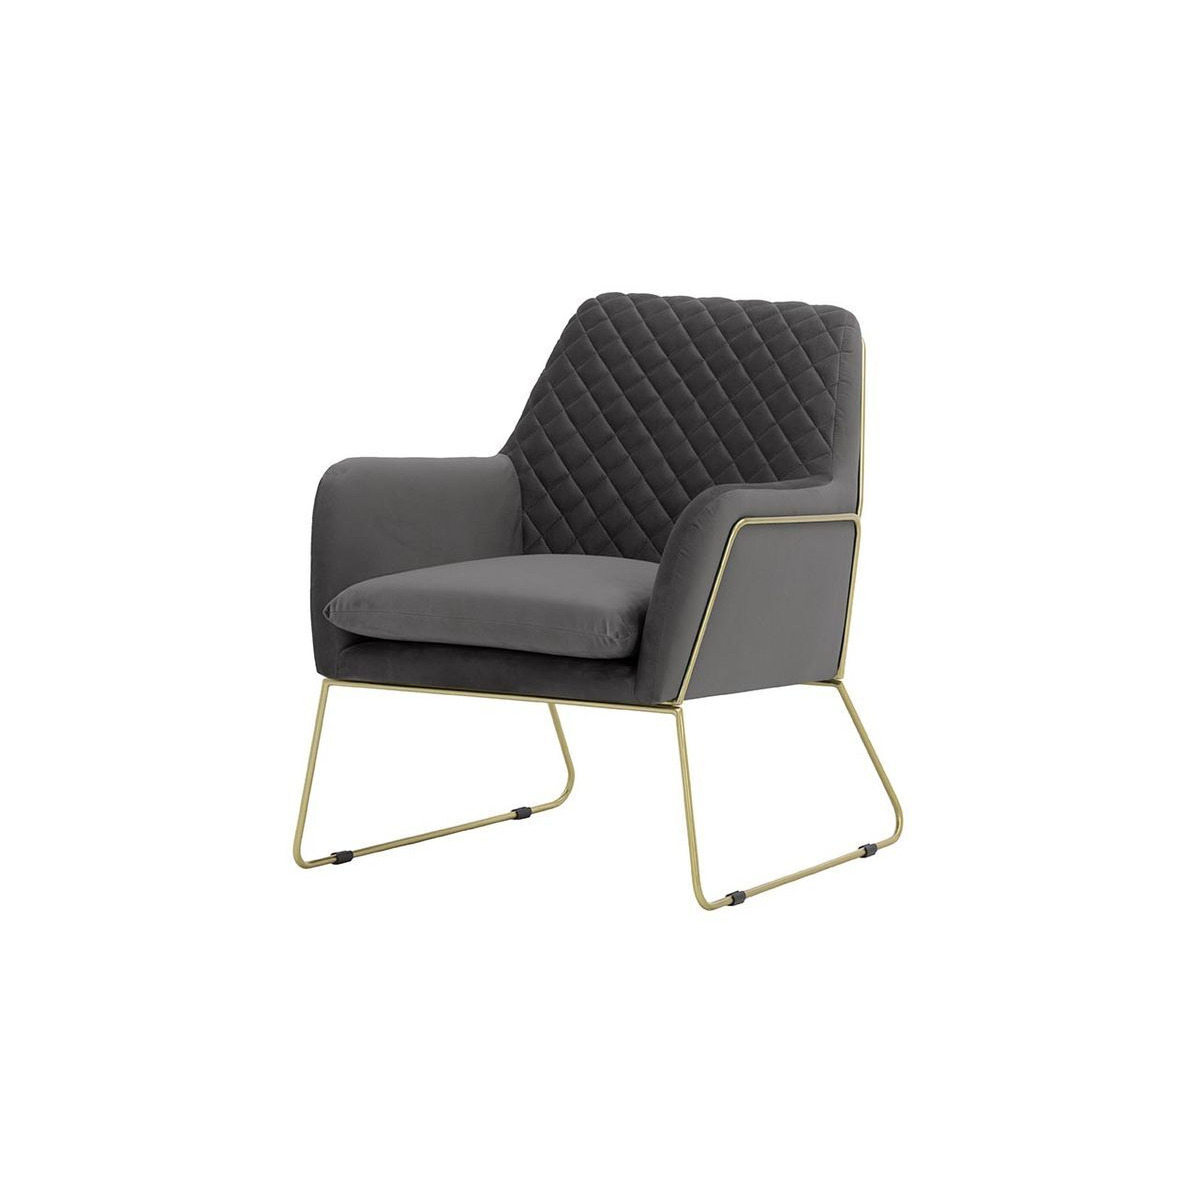 Foxe Metal Frame Armchair with Stitching, graphite, Leg colour: gold metal frame - image 1